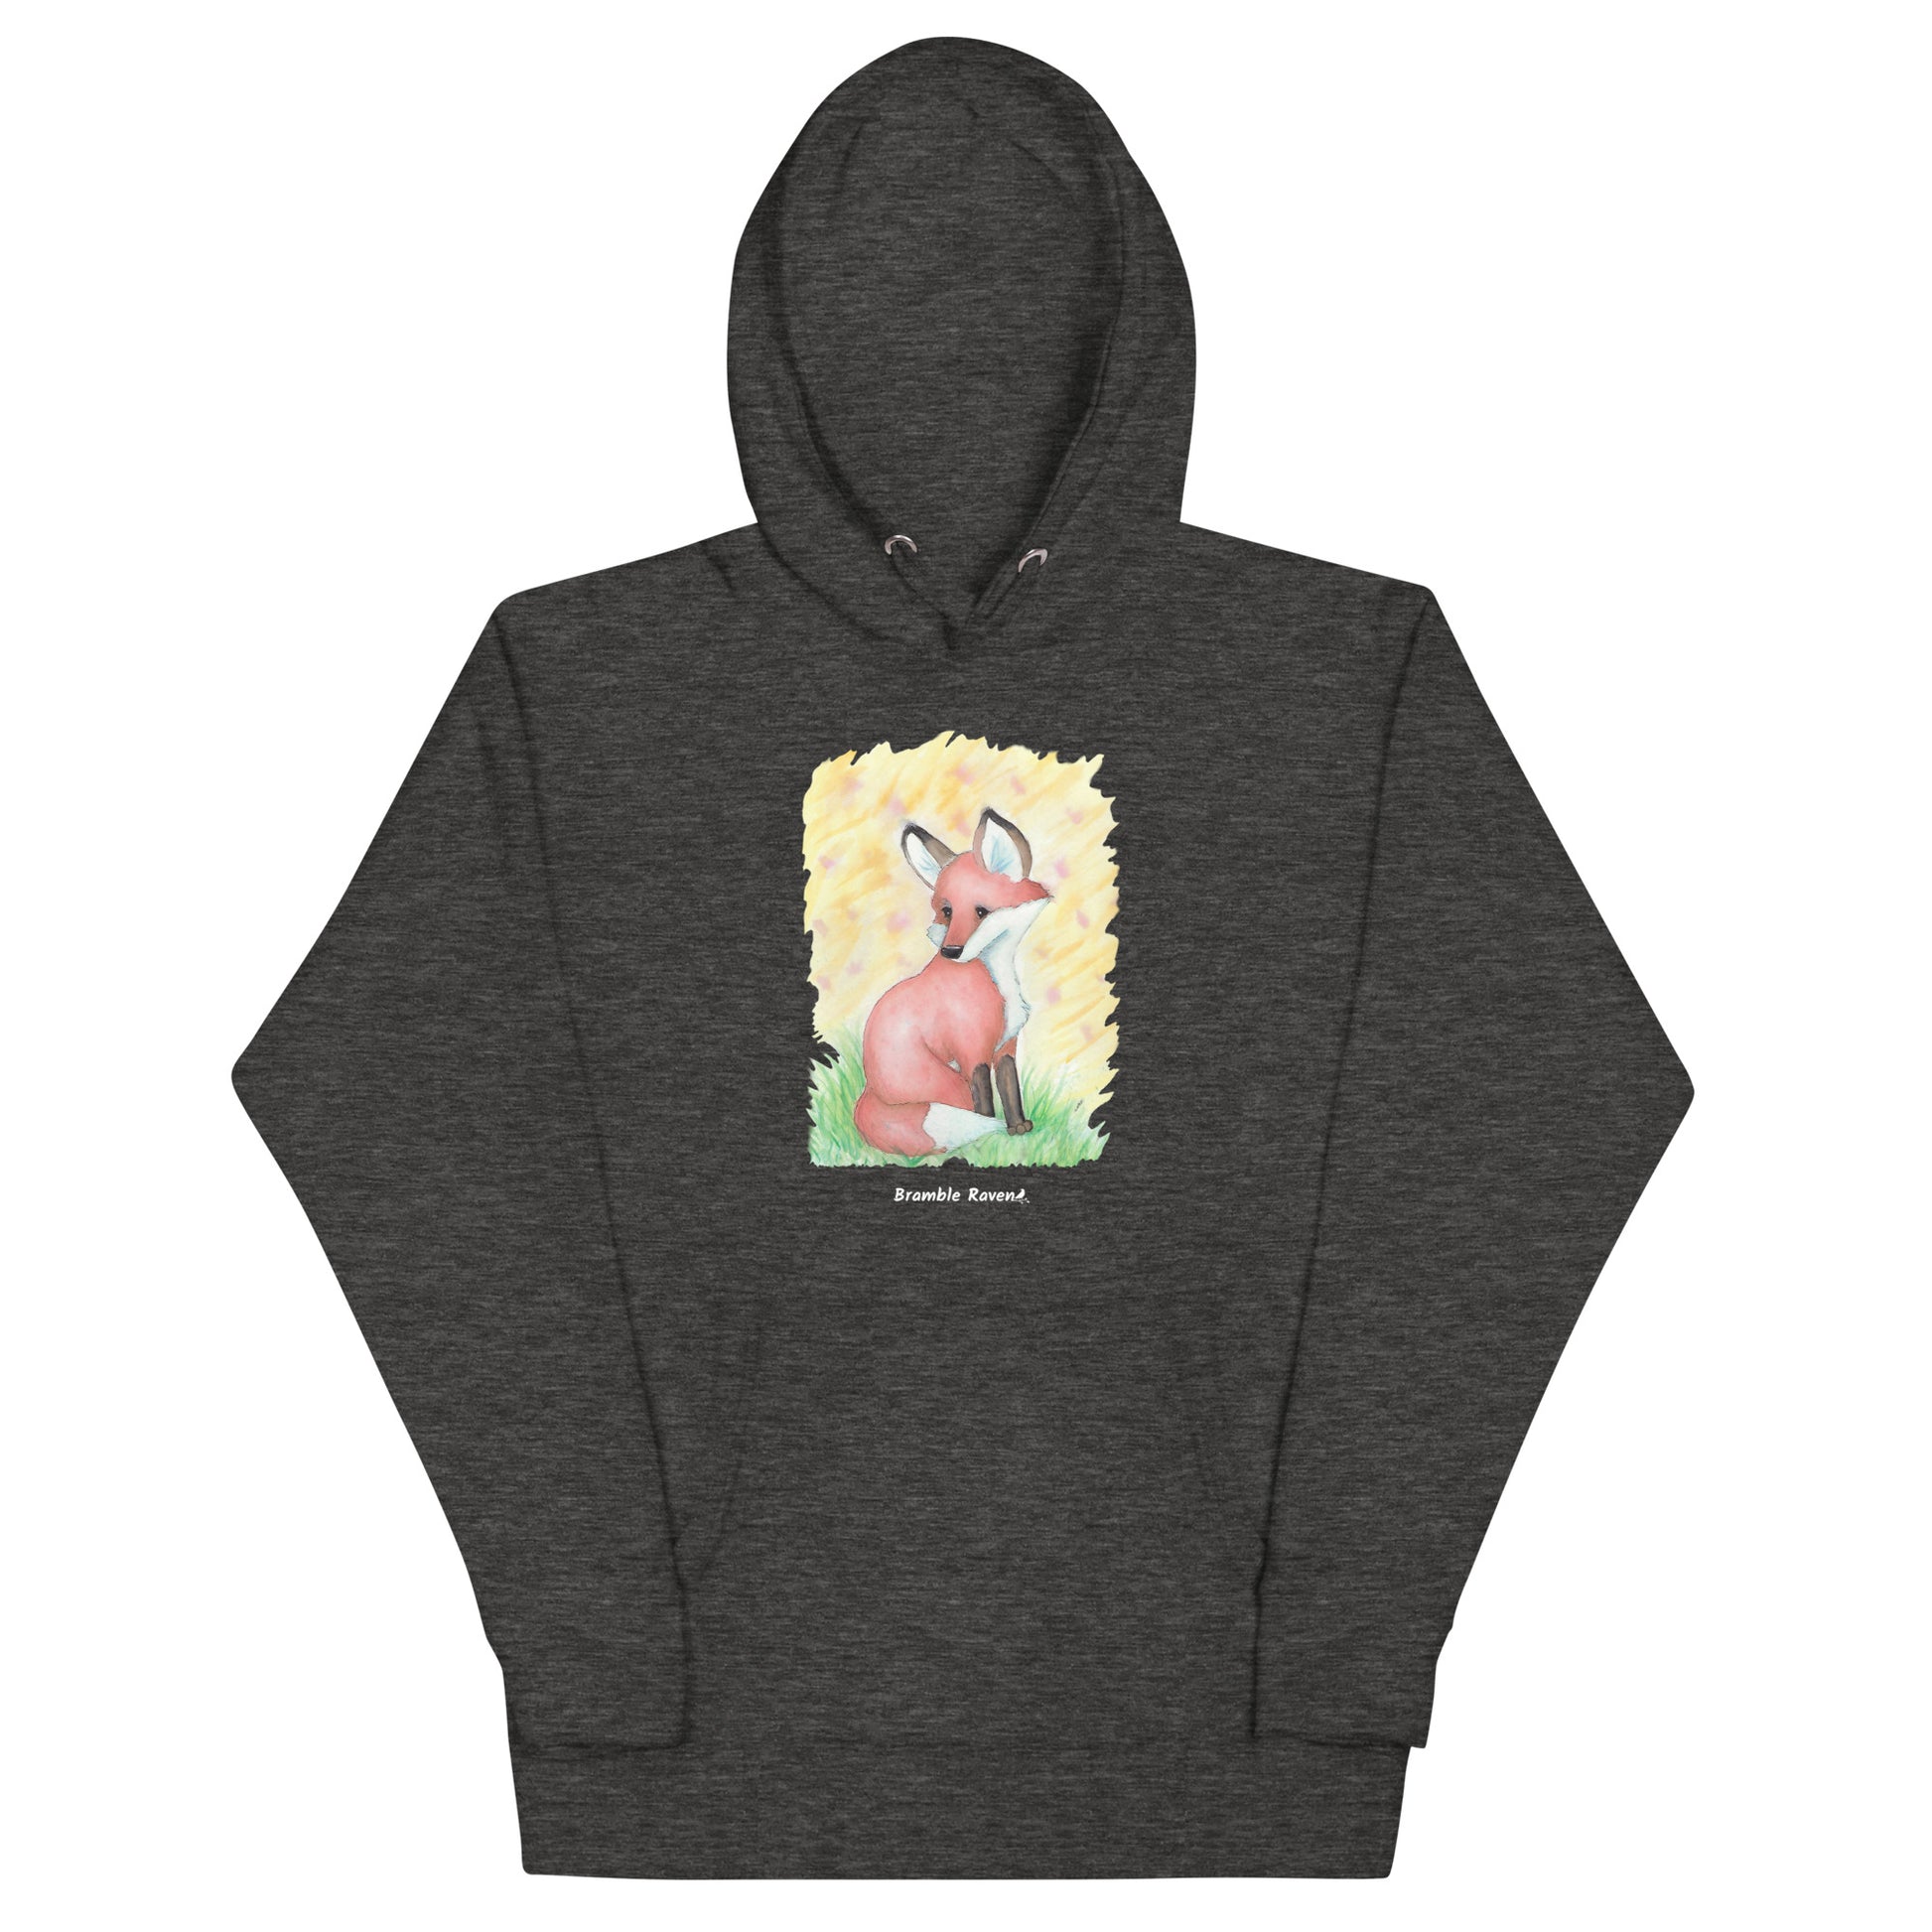 Unisex charcoal heather grey colored hoodie. Features original watercolor painting of a fox in the grass against a yellow backdrop.